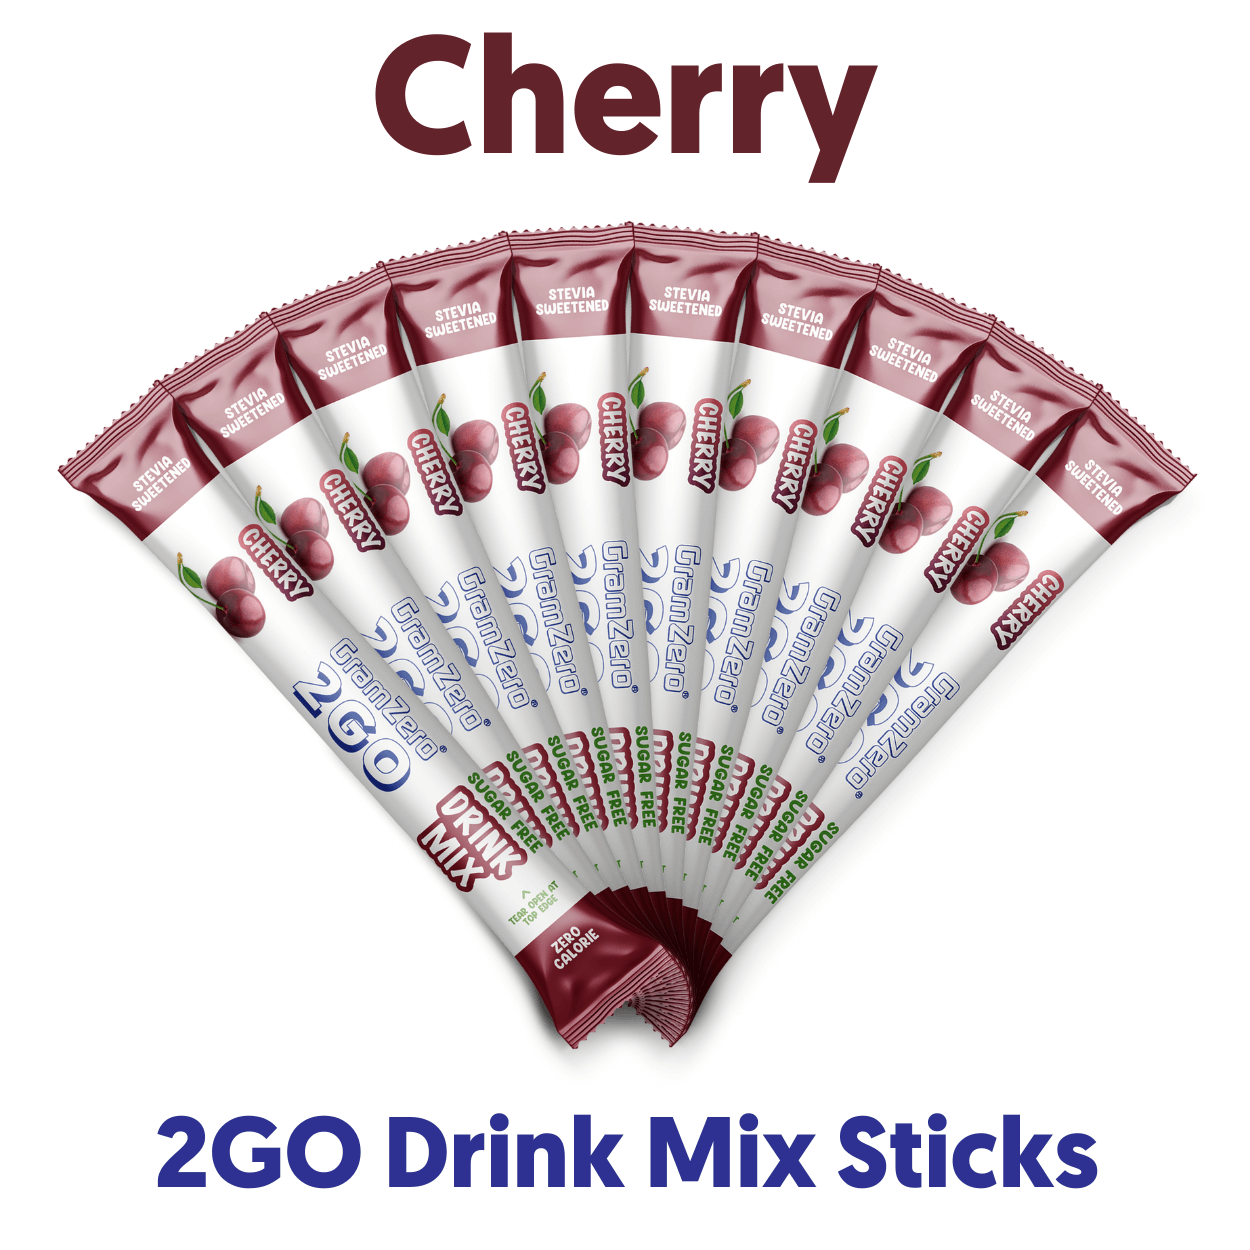 CHERRY 2GO Sugar Free Drink Mix Sticks: 10 Pack ~ Great for Loaded Tea Kits